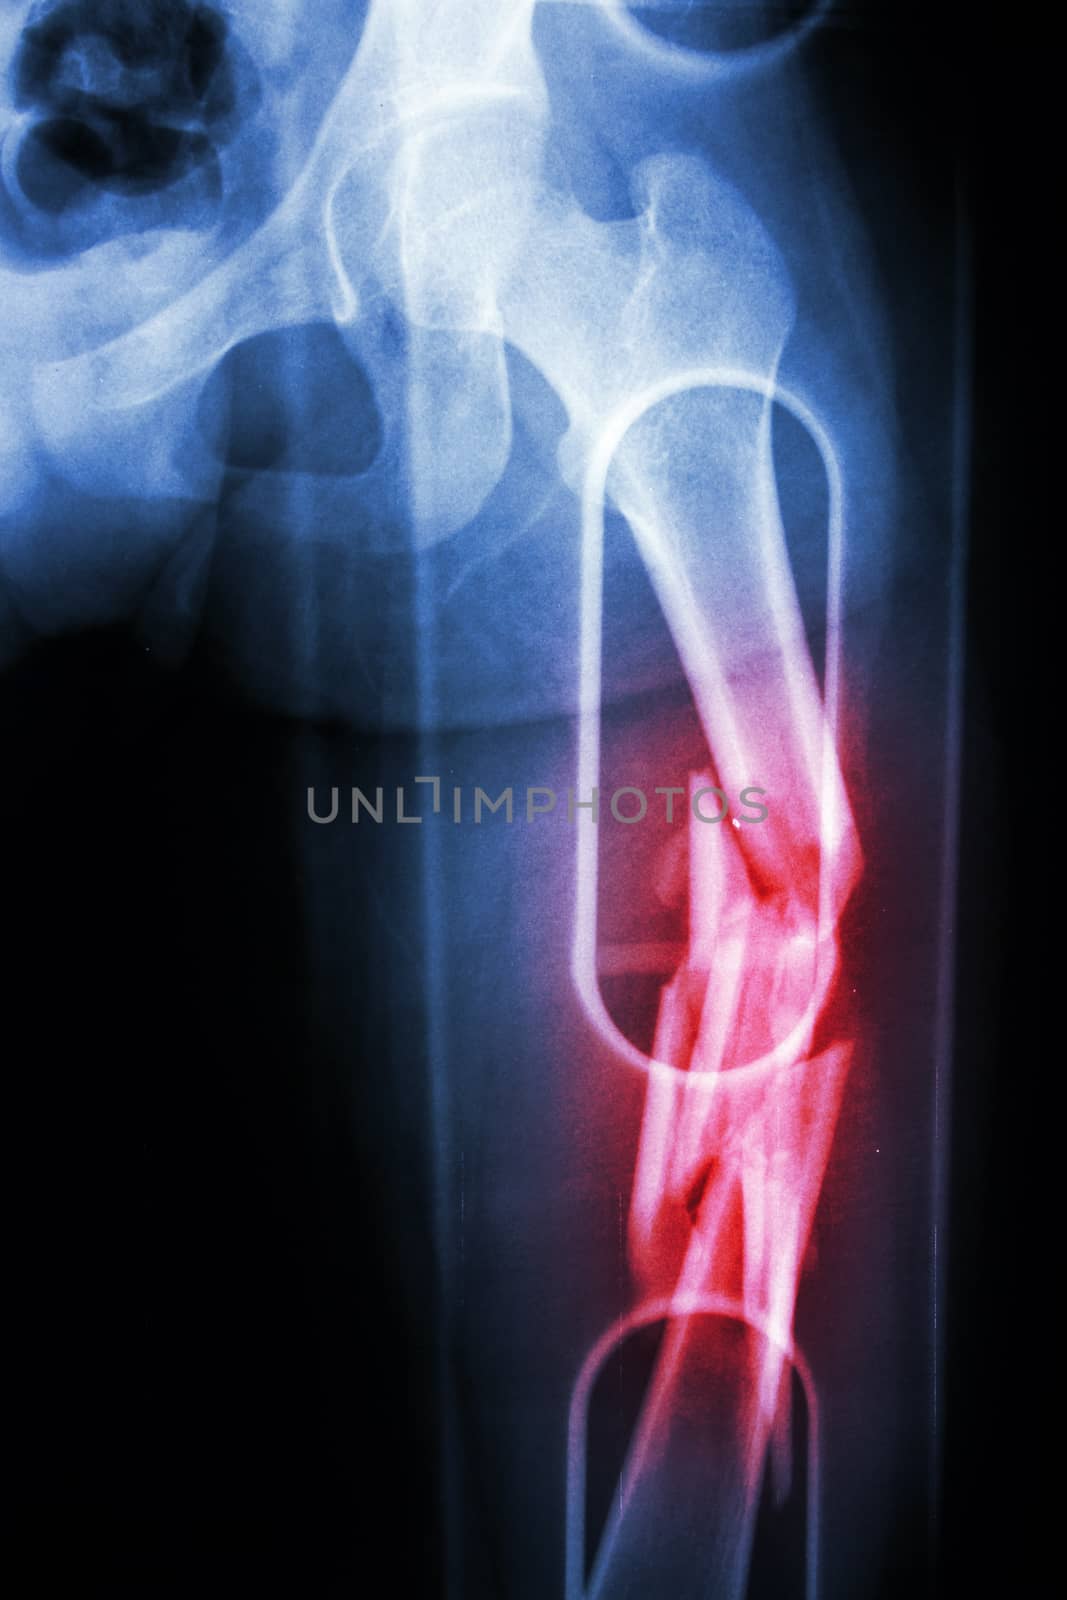 Film X-ray show comminute fracture shaft of femur (thigh bone). It was spliced